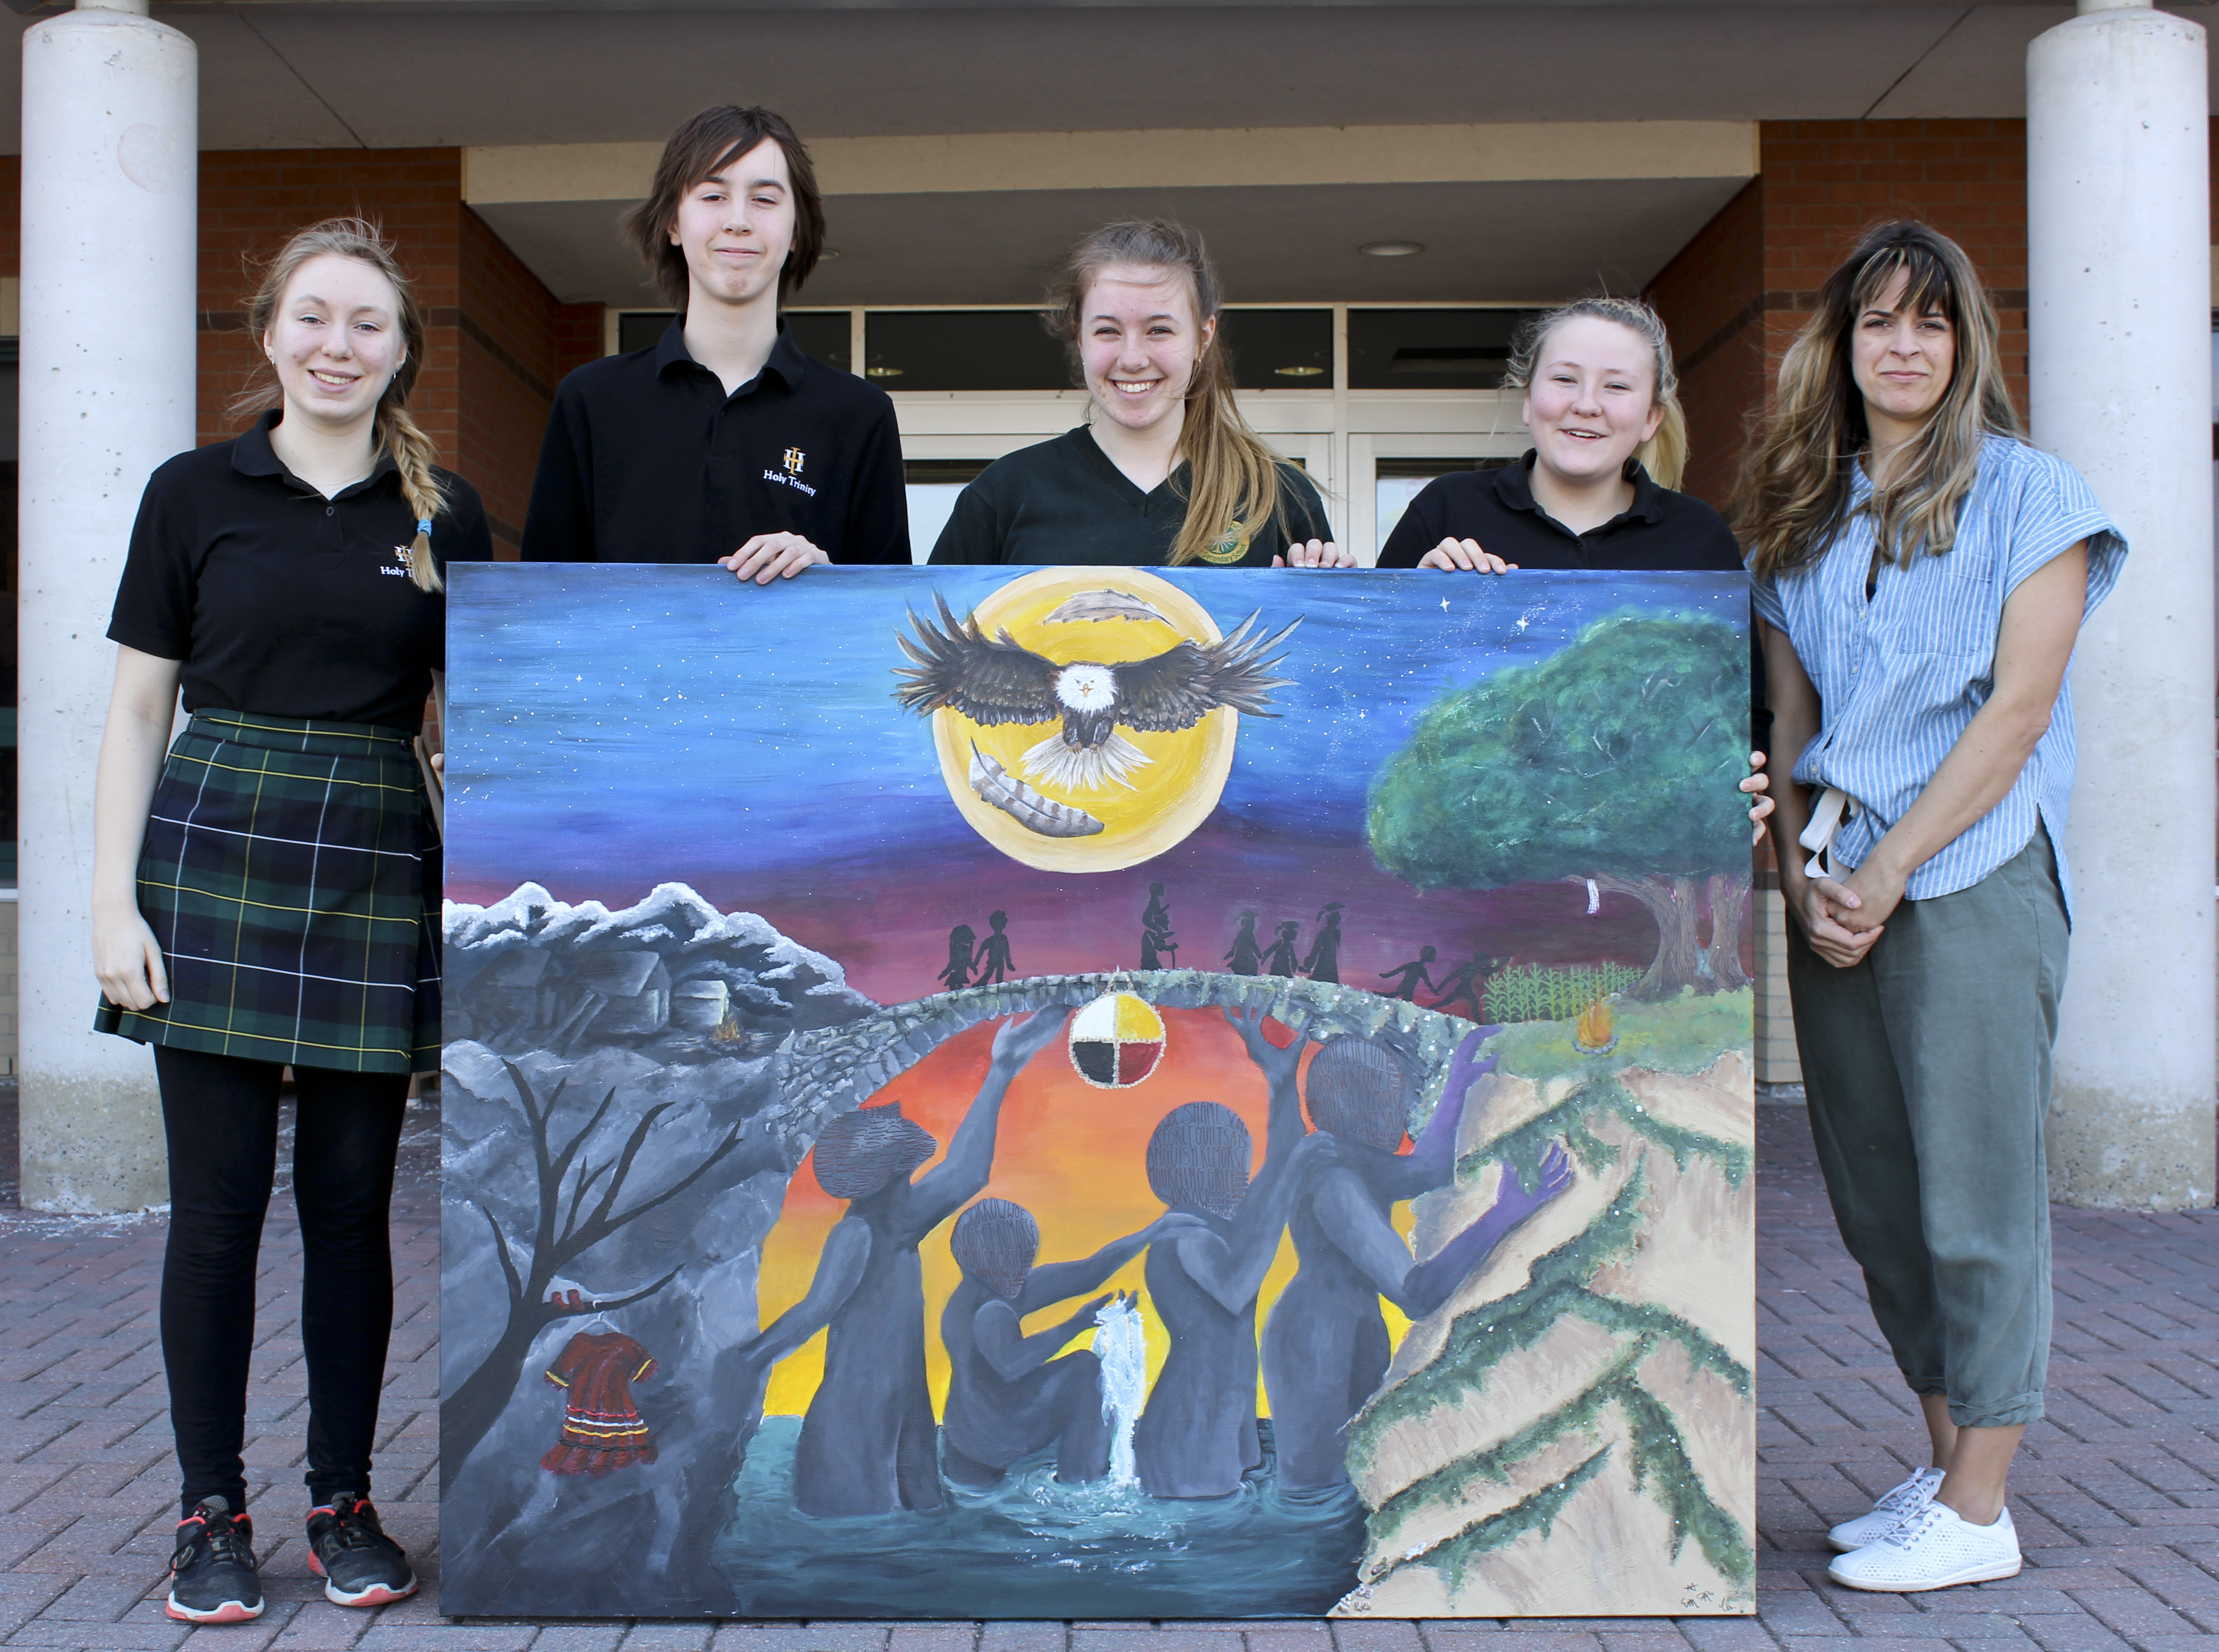 Students pose with a large painting.